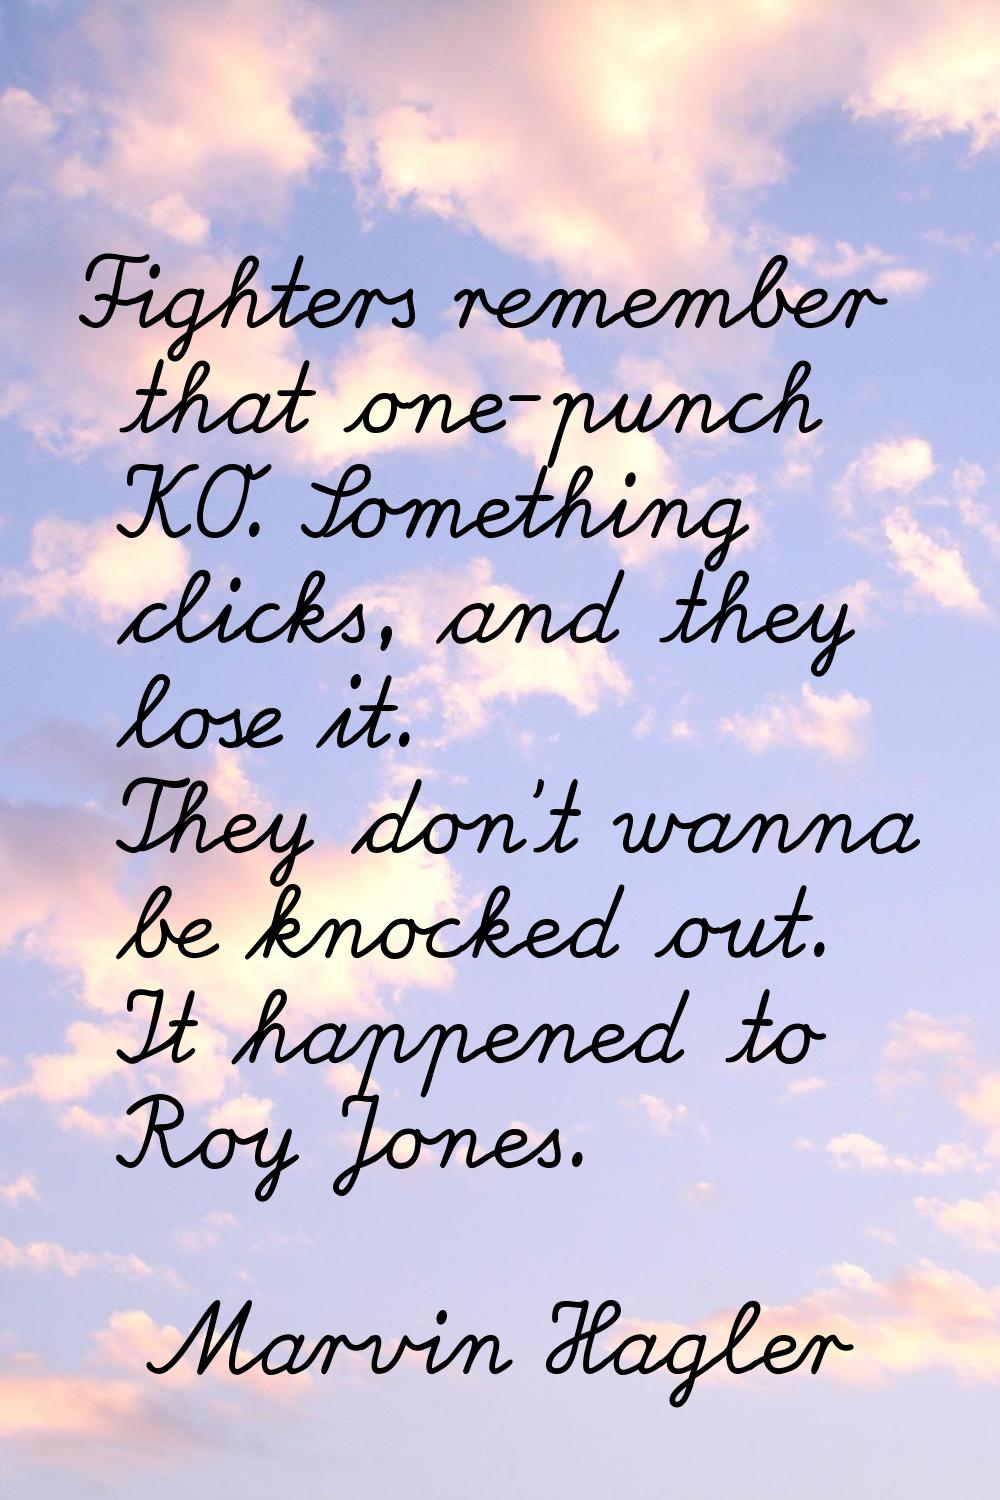 Fighters remember that one-punch KO. Something clicks, and they lose it. They don't wanna be knocke